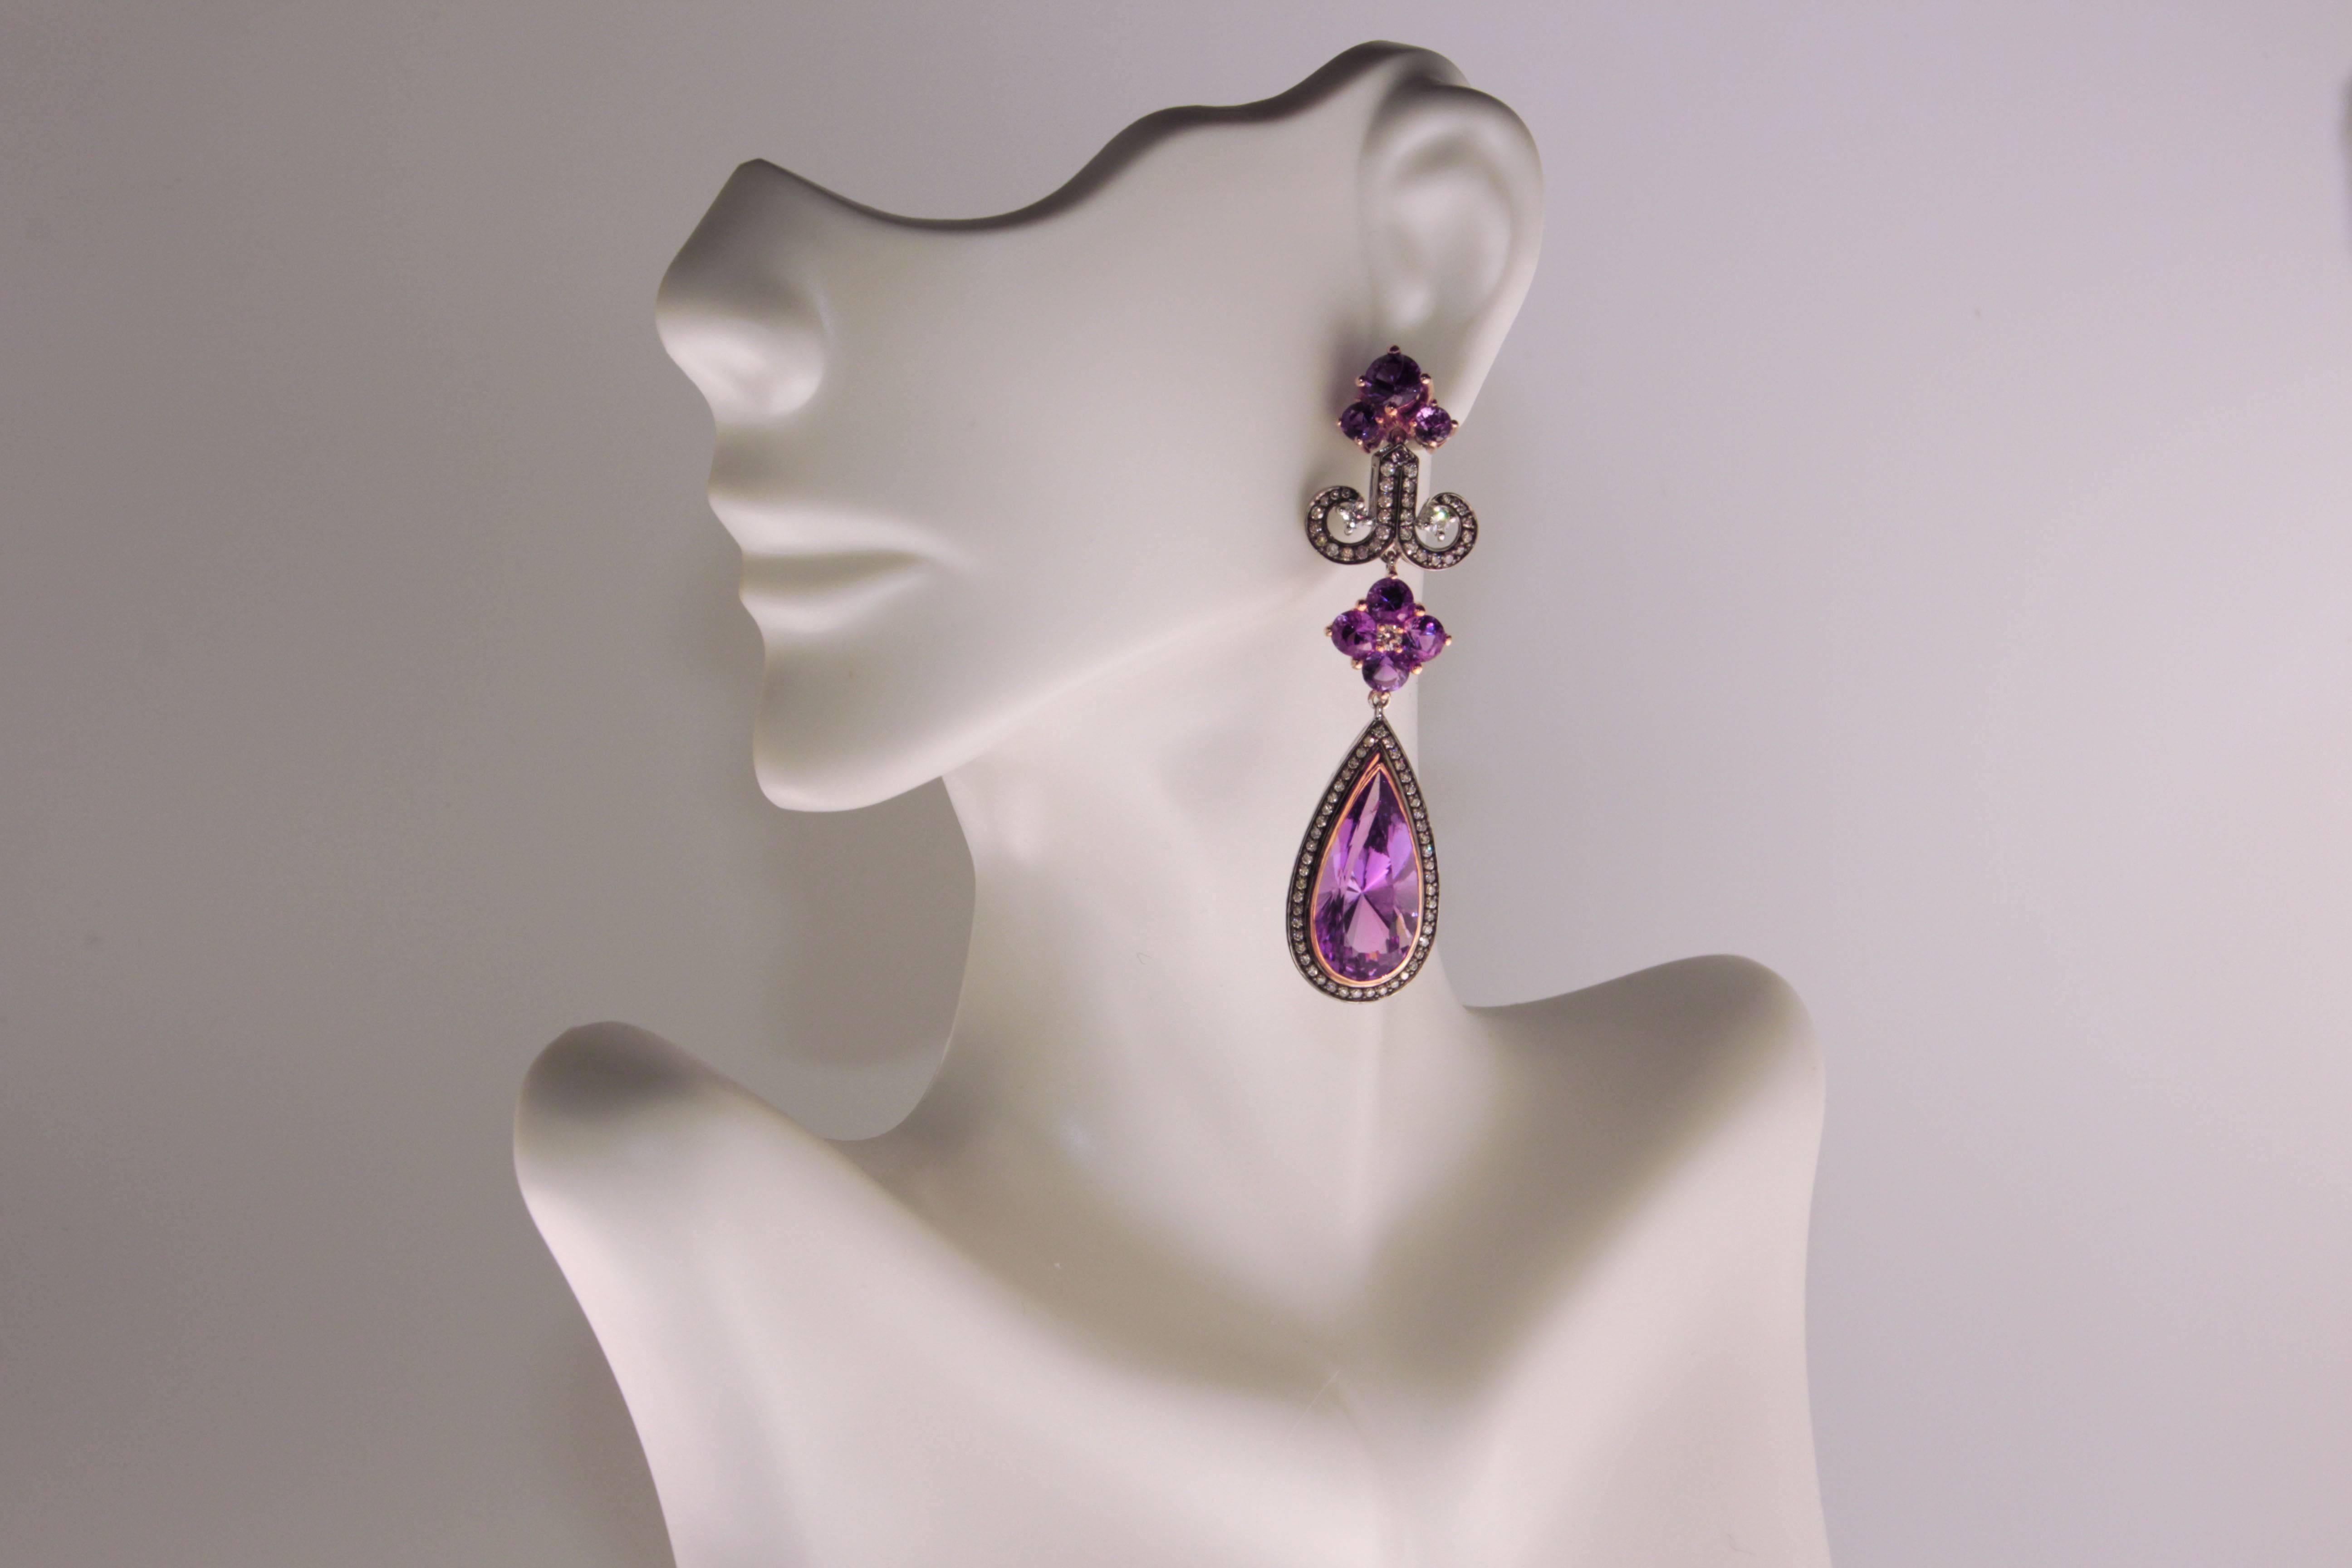 Zorab Creation 20.20 Carat Amethyst Quartz Diamond Chandelier Earrings In New Condition For Sale In San Diego, CA